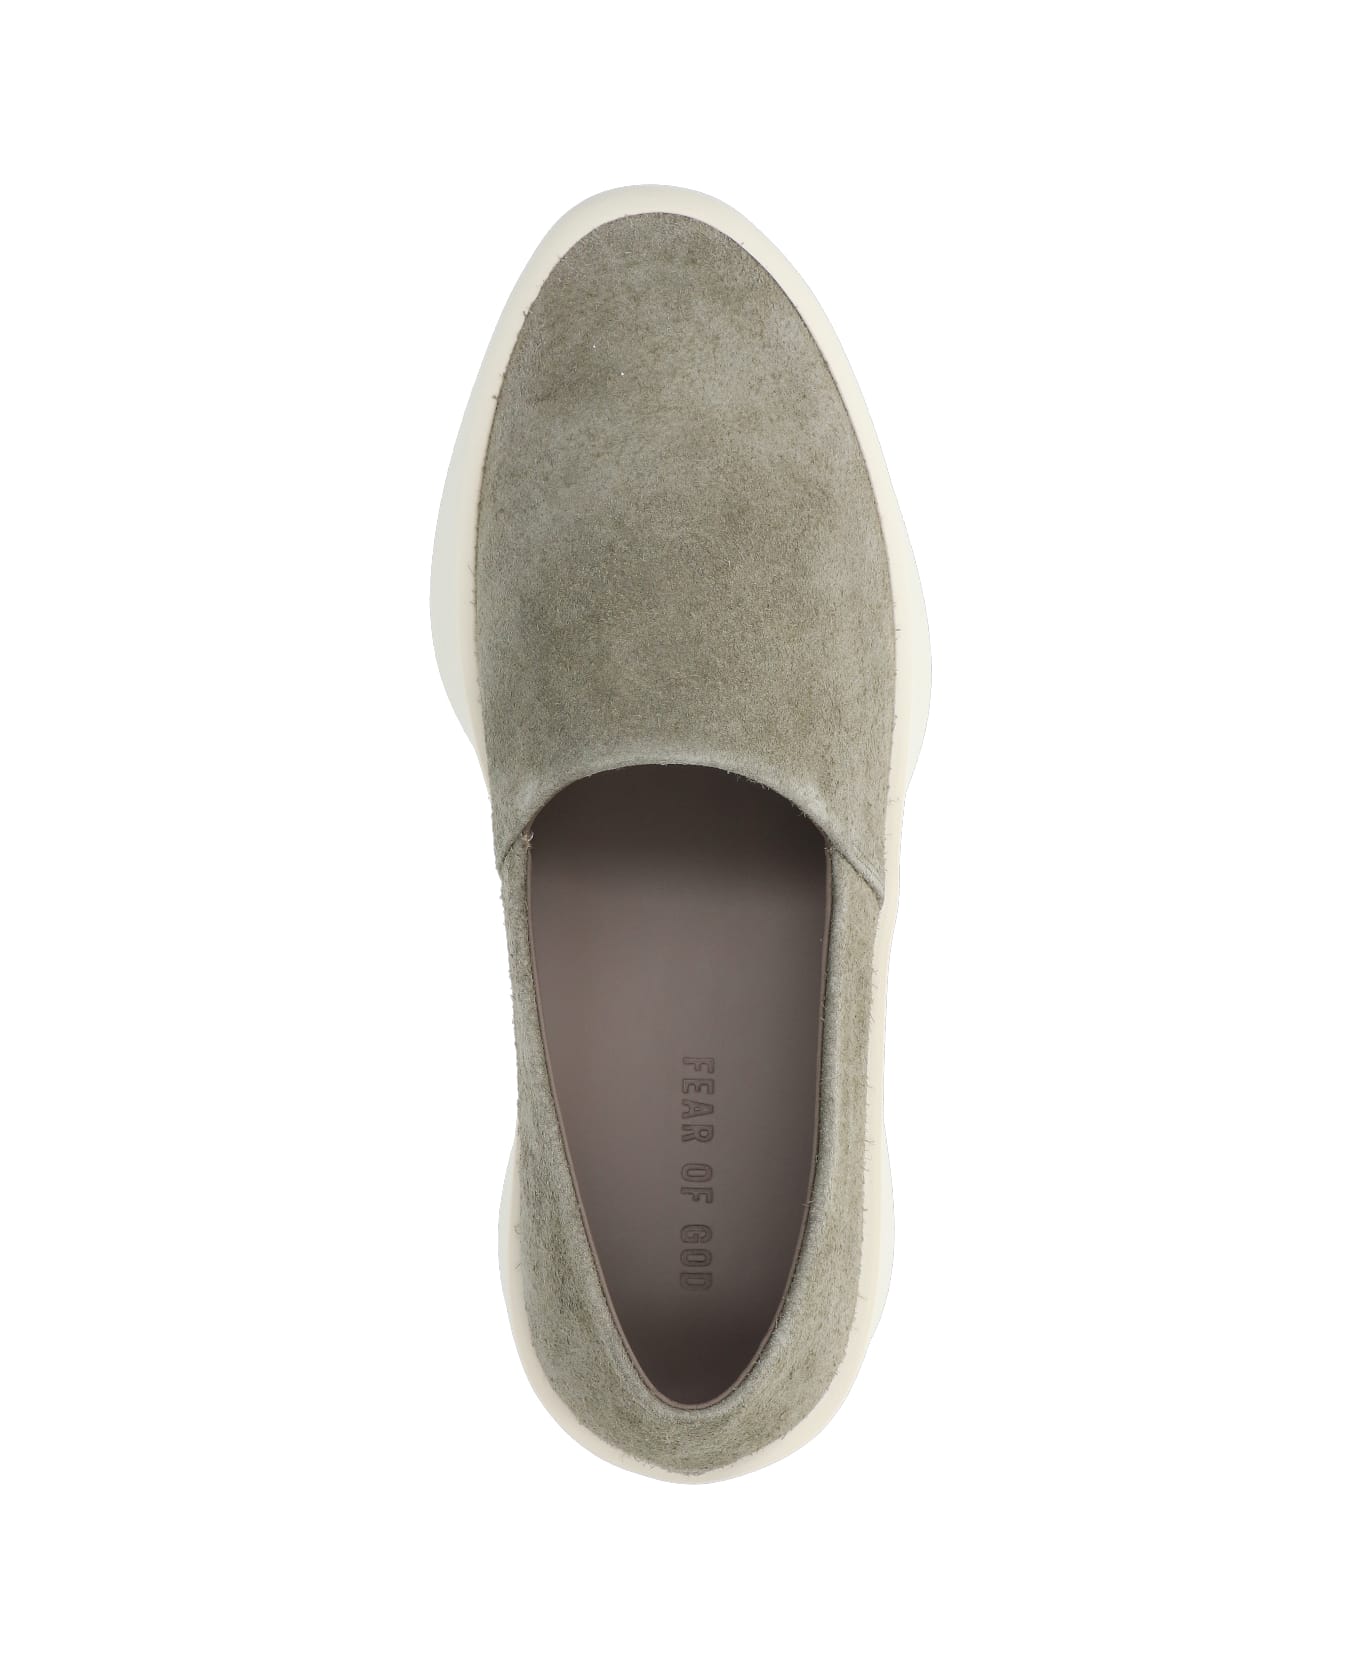 Fear of God Espadrilles Sneakers - Taupe